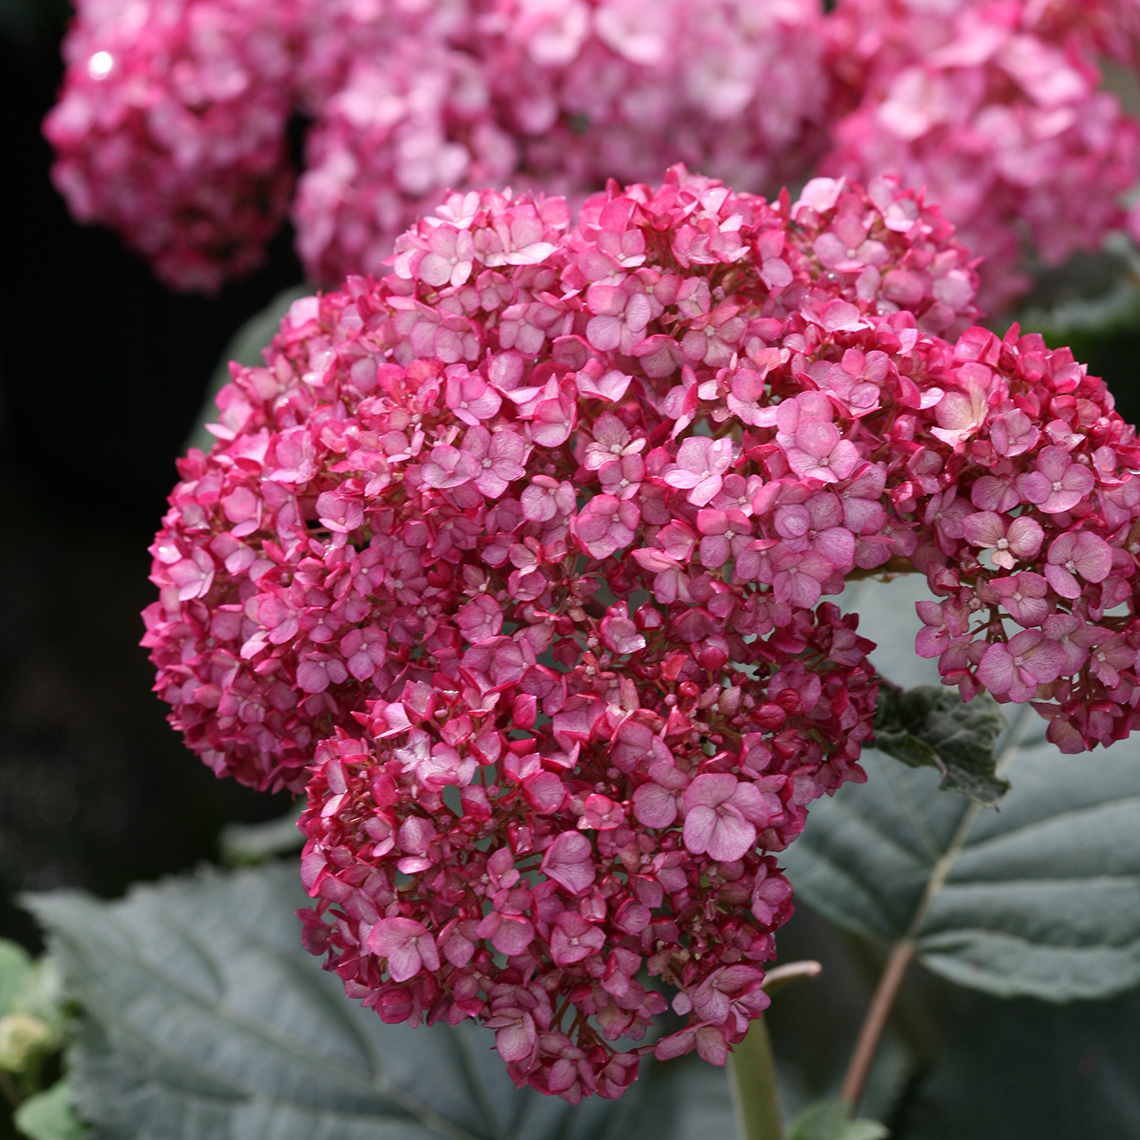 Closeup of the deep ruby pink blooms of Invincibelle Ruby hydrangea